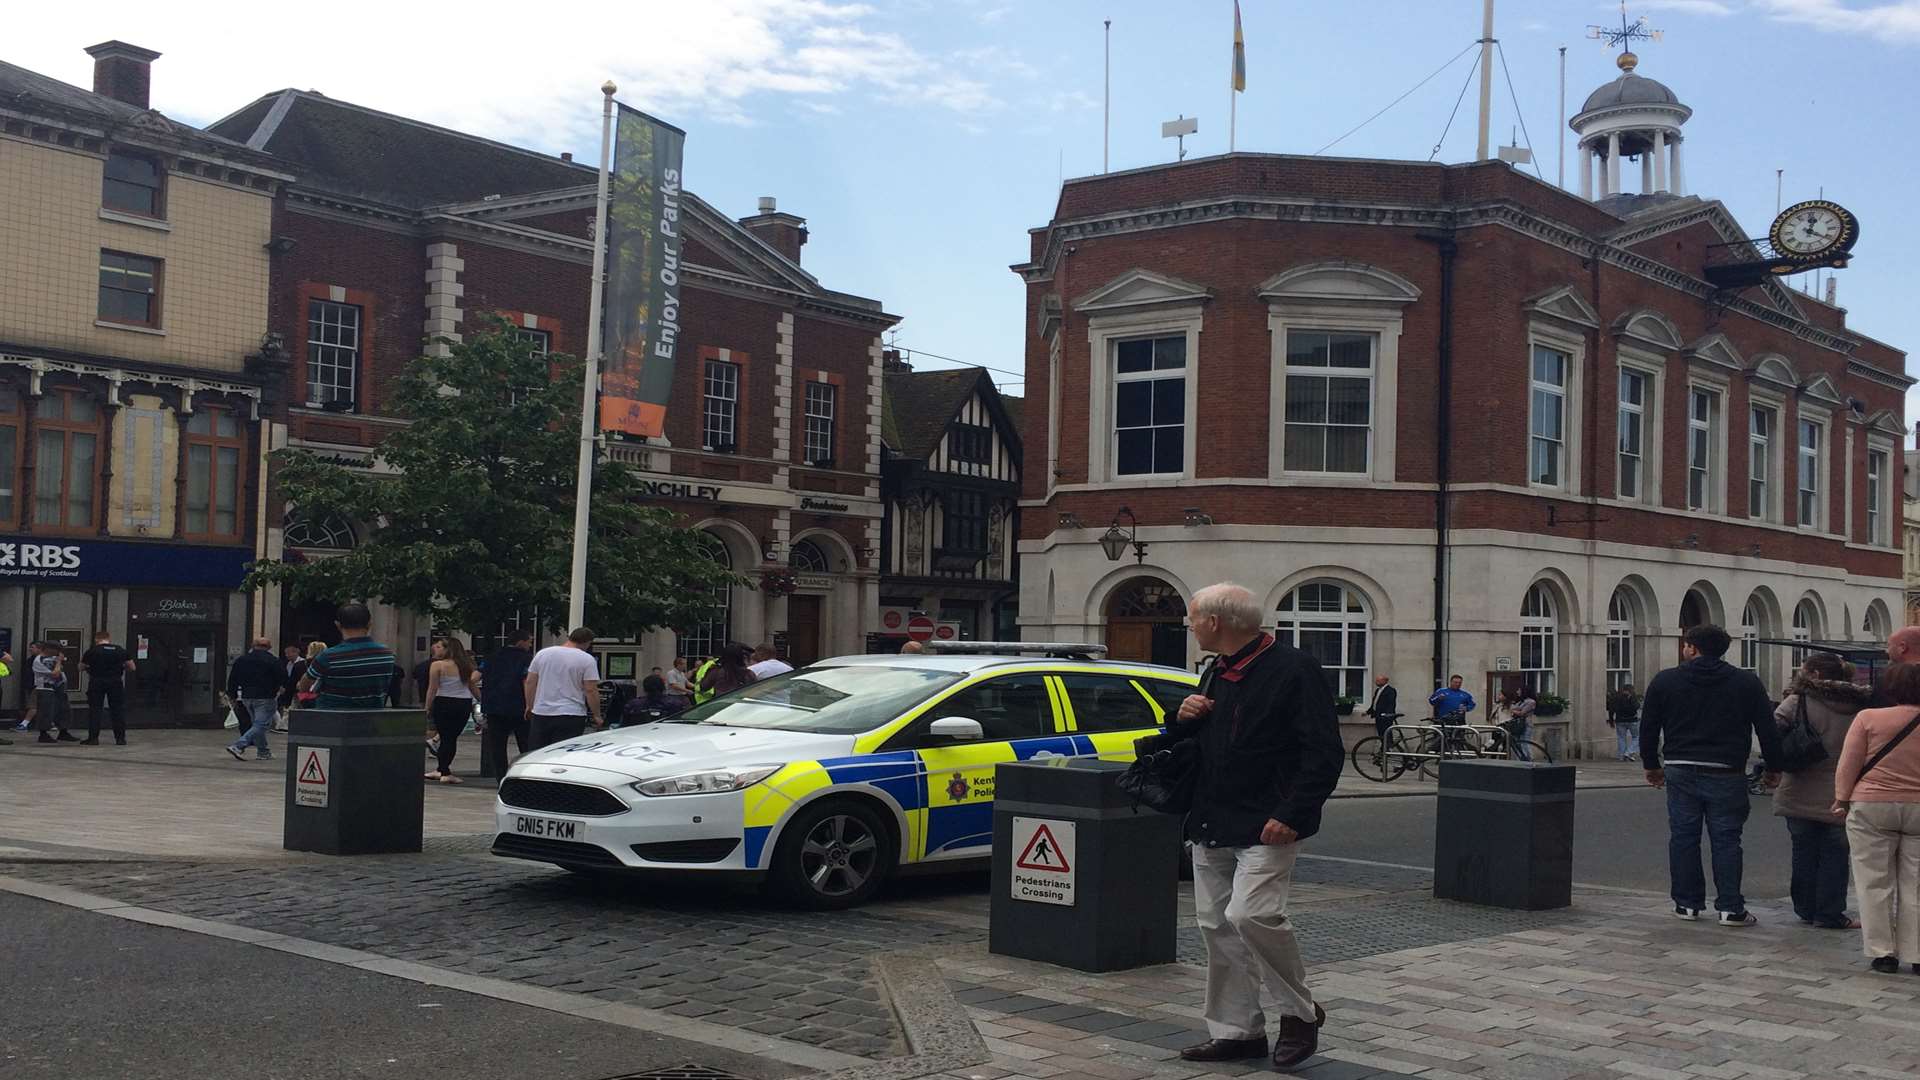 Police were called to reports of a fight in Jubilee Square